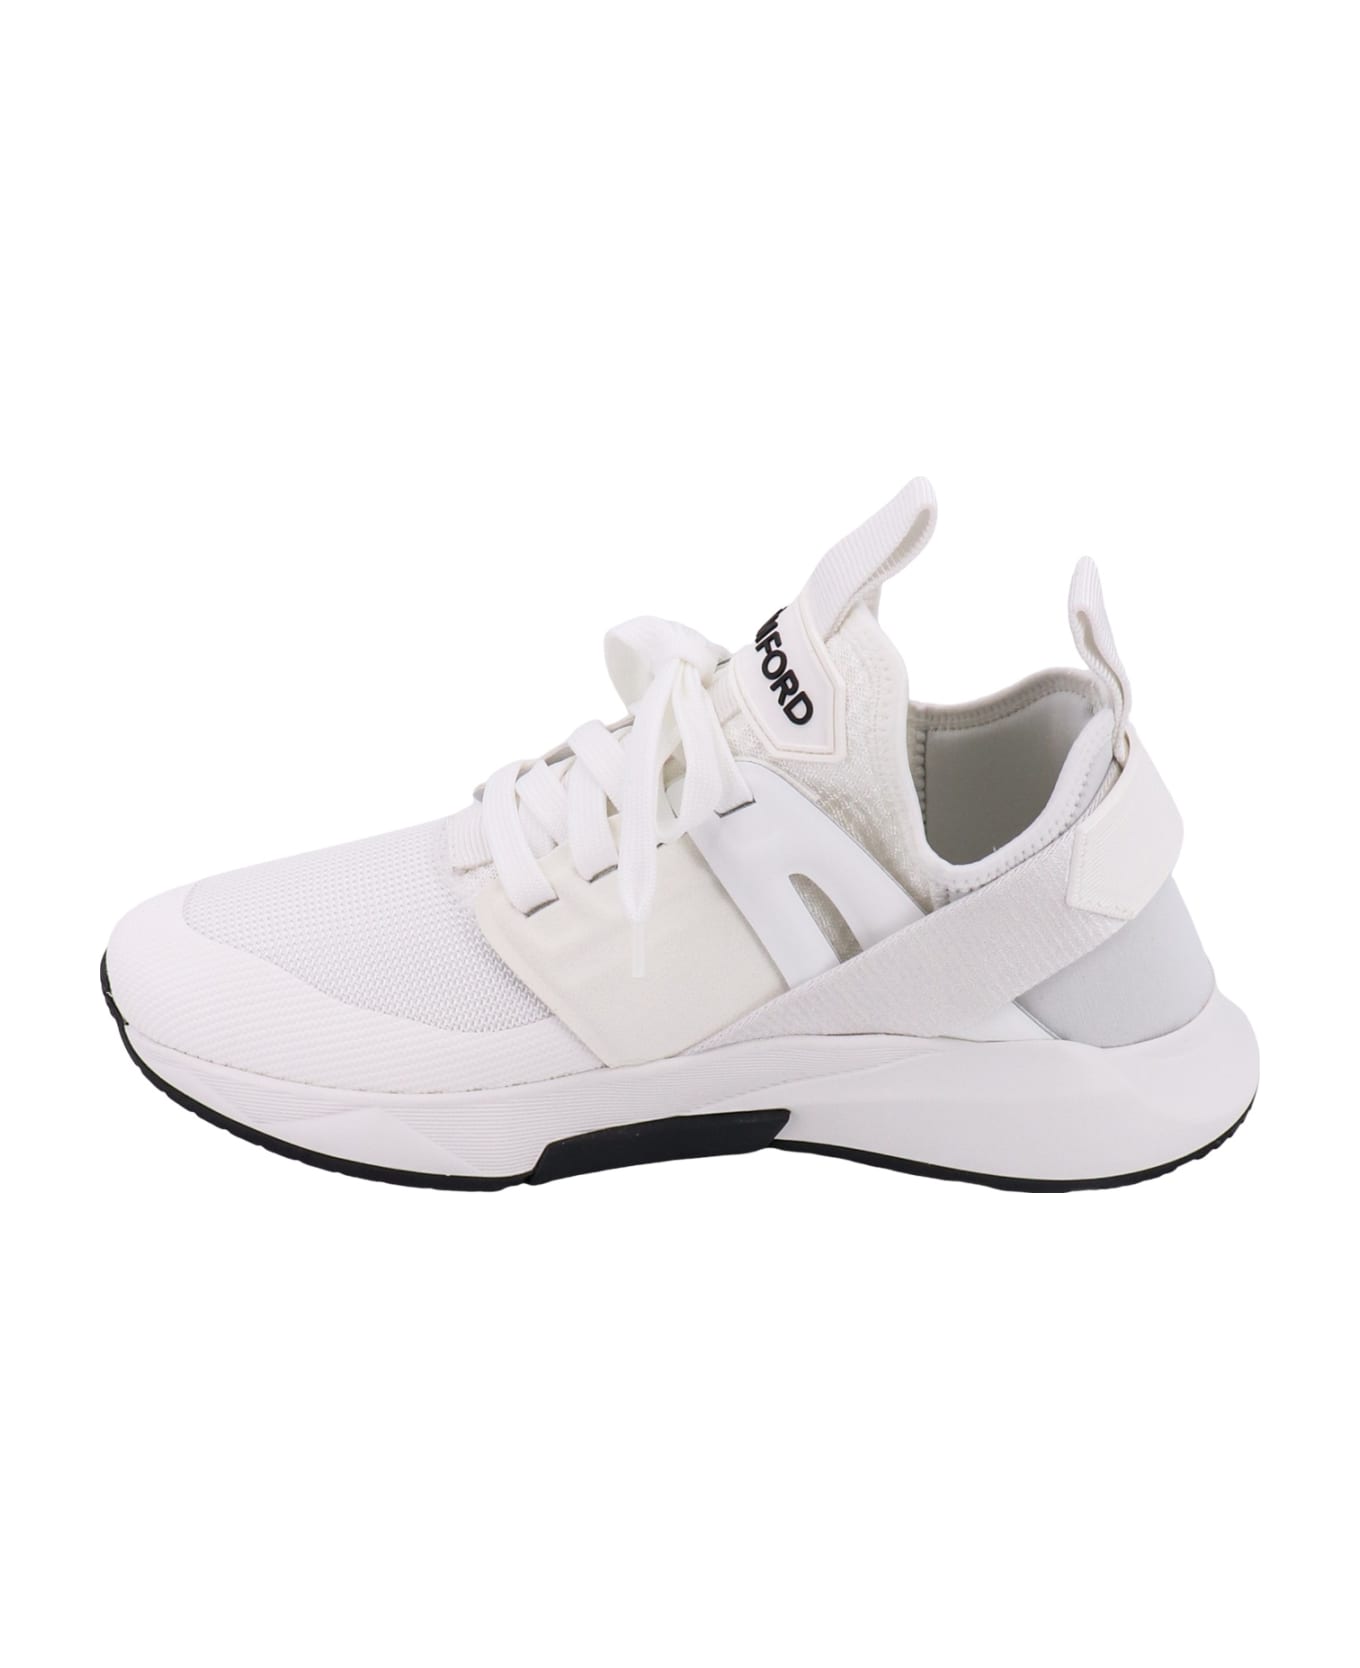 Tom Ford Jago Sneakers - White